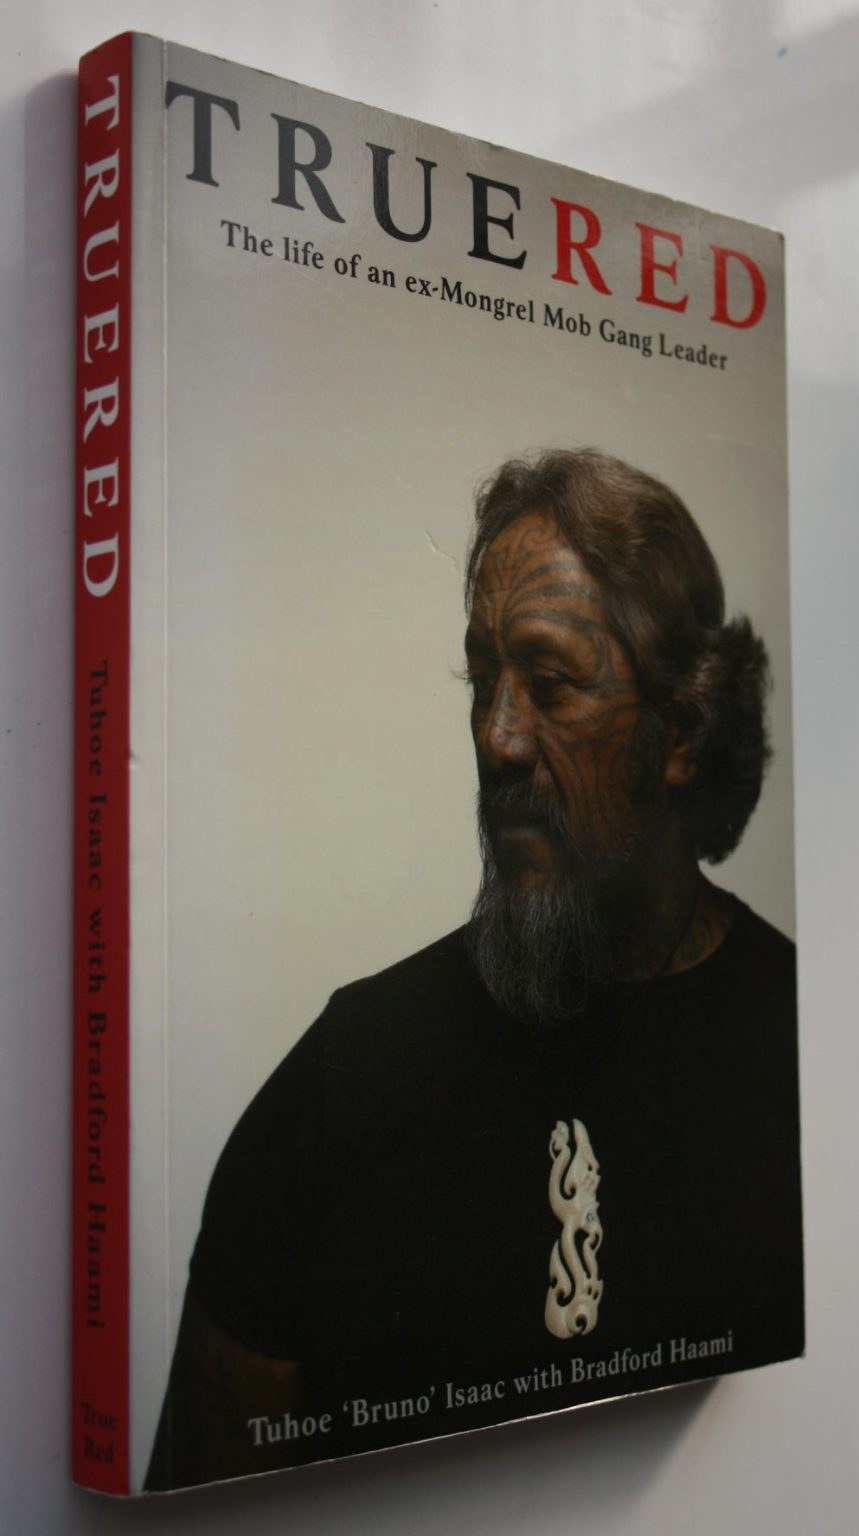 True Red. The Life of an Ex-Mongrel Mob Gang Leader. SIGNED By Tuhoe 'Bruno' Isaac, Bradford Haami.